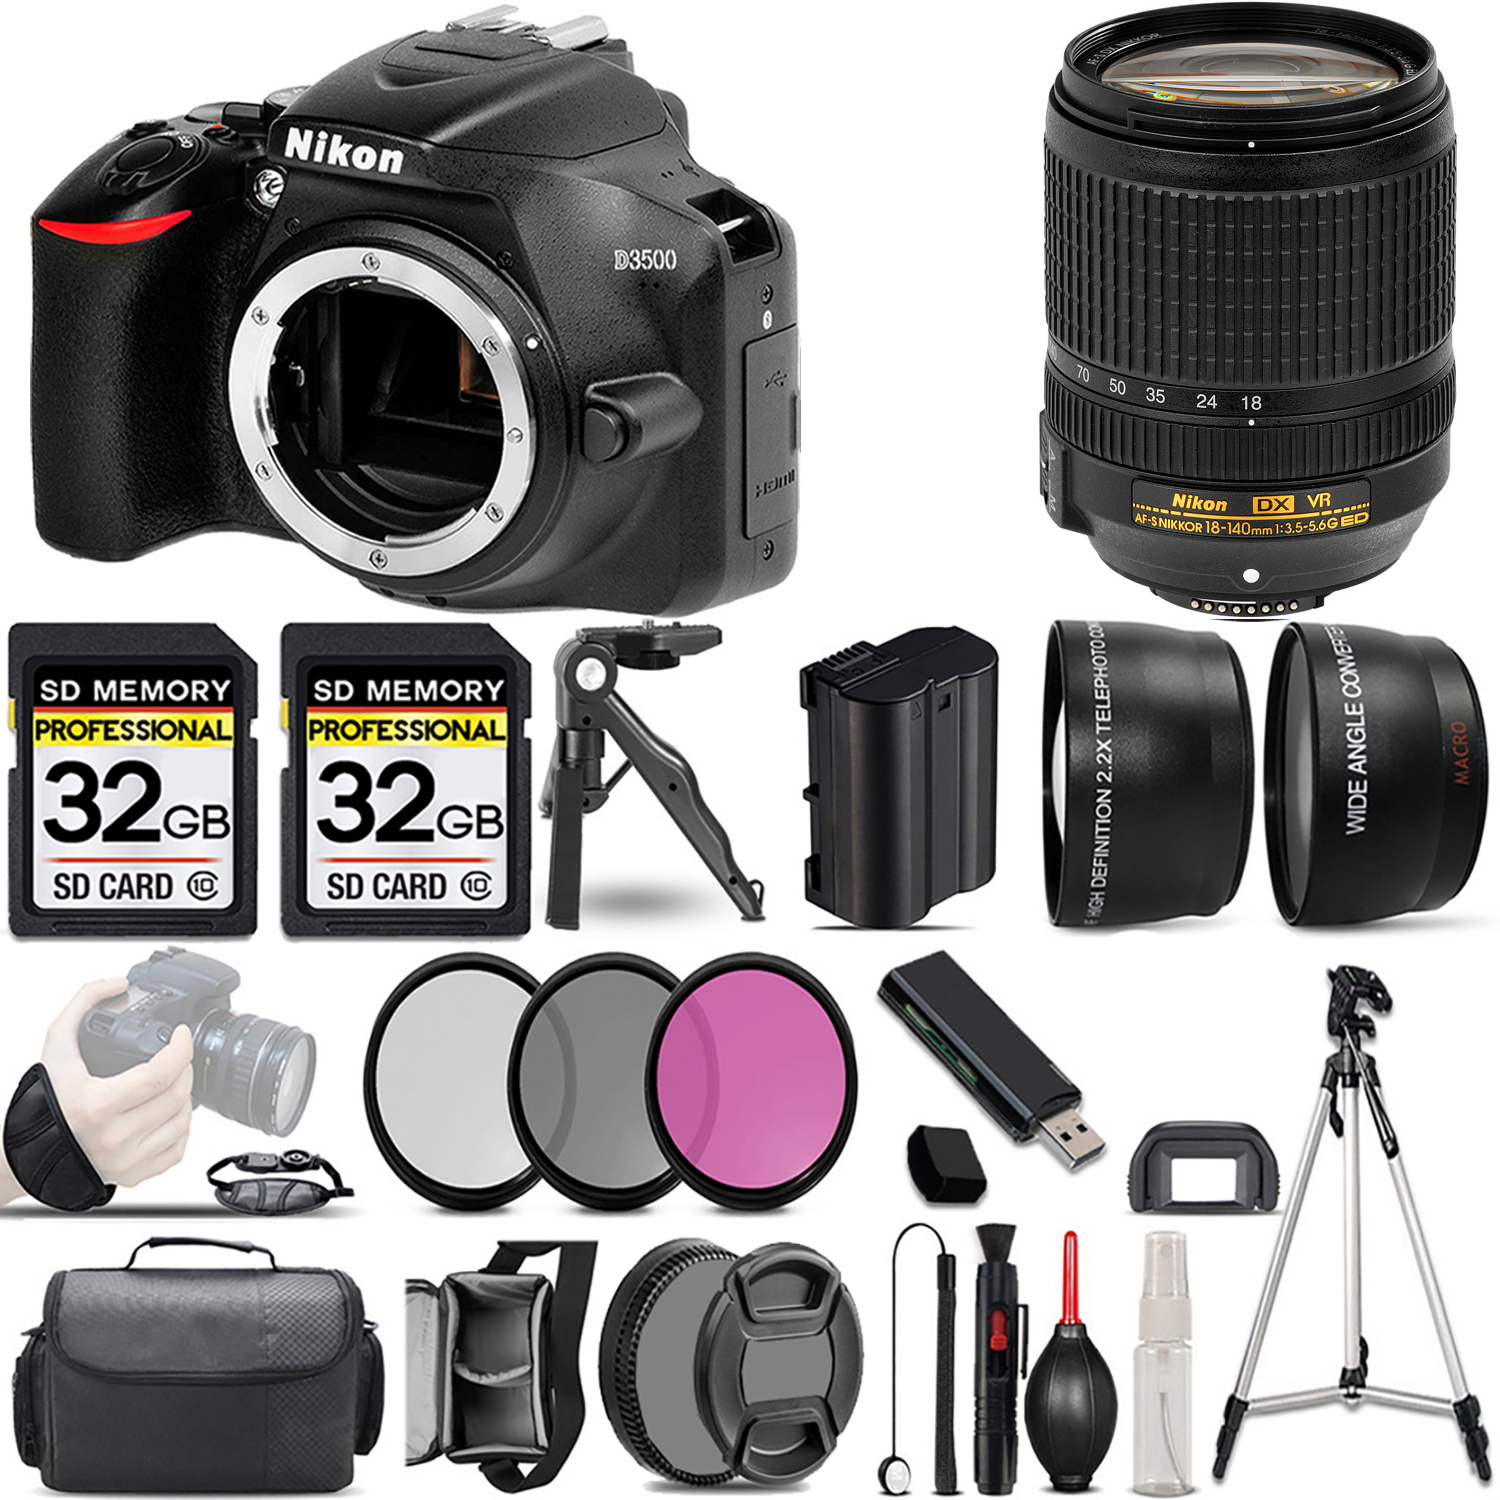 D3500 DSLR Camera (Body Only) + 18-140mm Lens + 3 Piece Filter Set + 64GB *FREE SHIPPING*